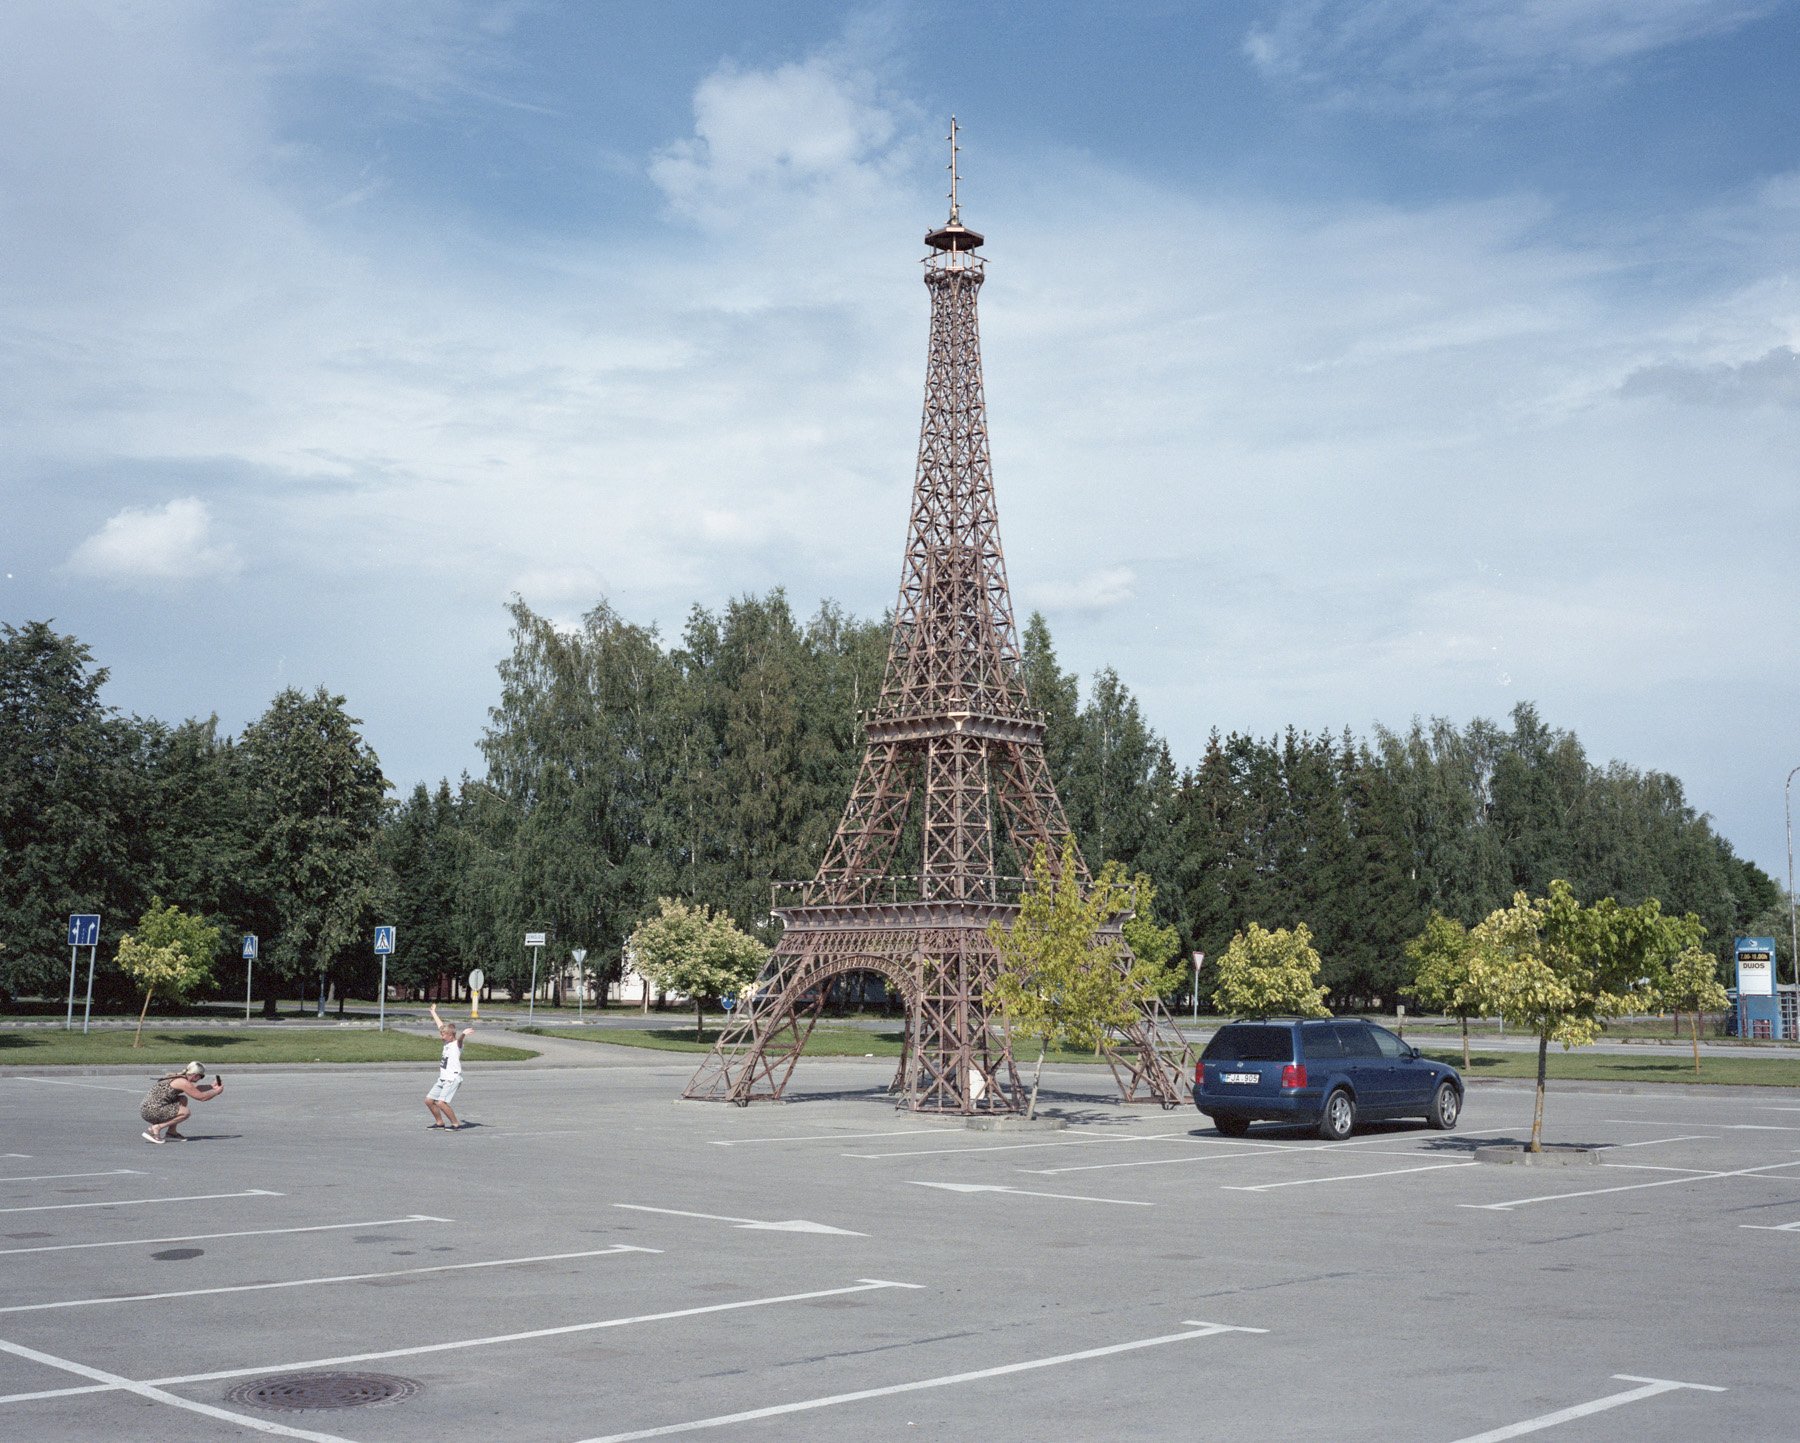  Lithuania, Mazeikiai., 2020. A reproduction of an Eiffel tower in fron of a shopping center named “Eiffel”. 